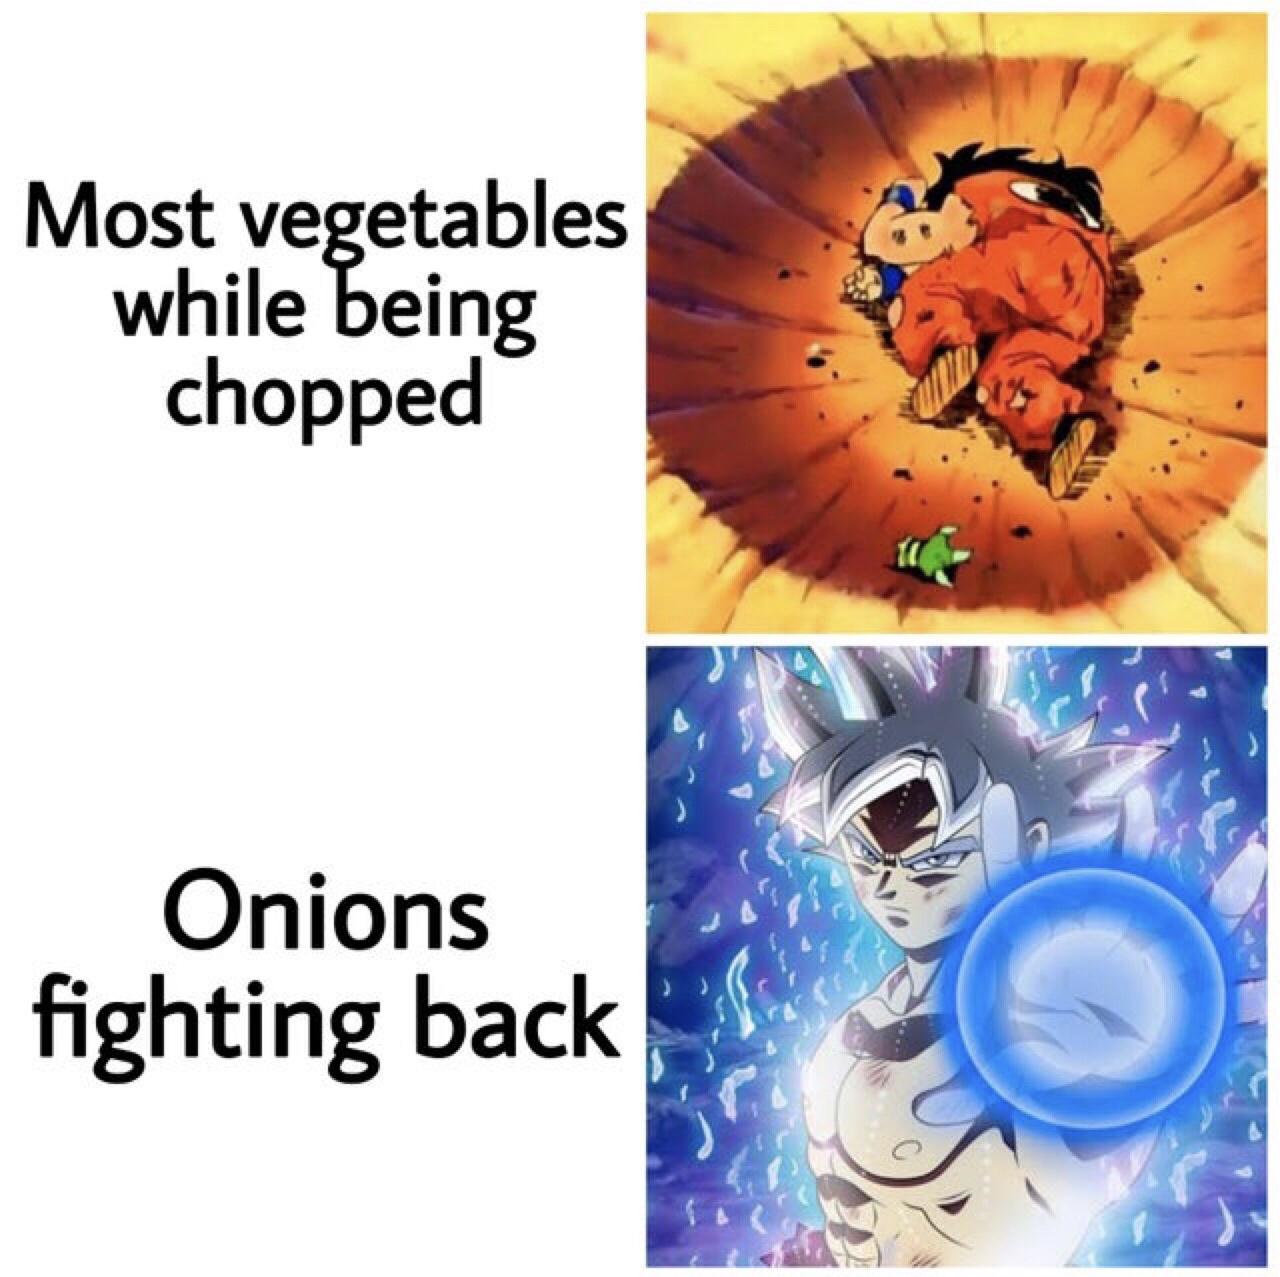 funny gaming memes - Vegetable - Most vegetables while being chopped Onions fighting back